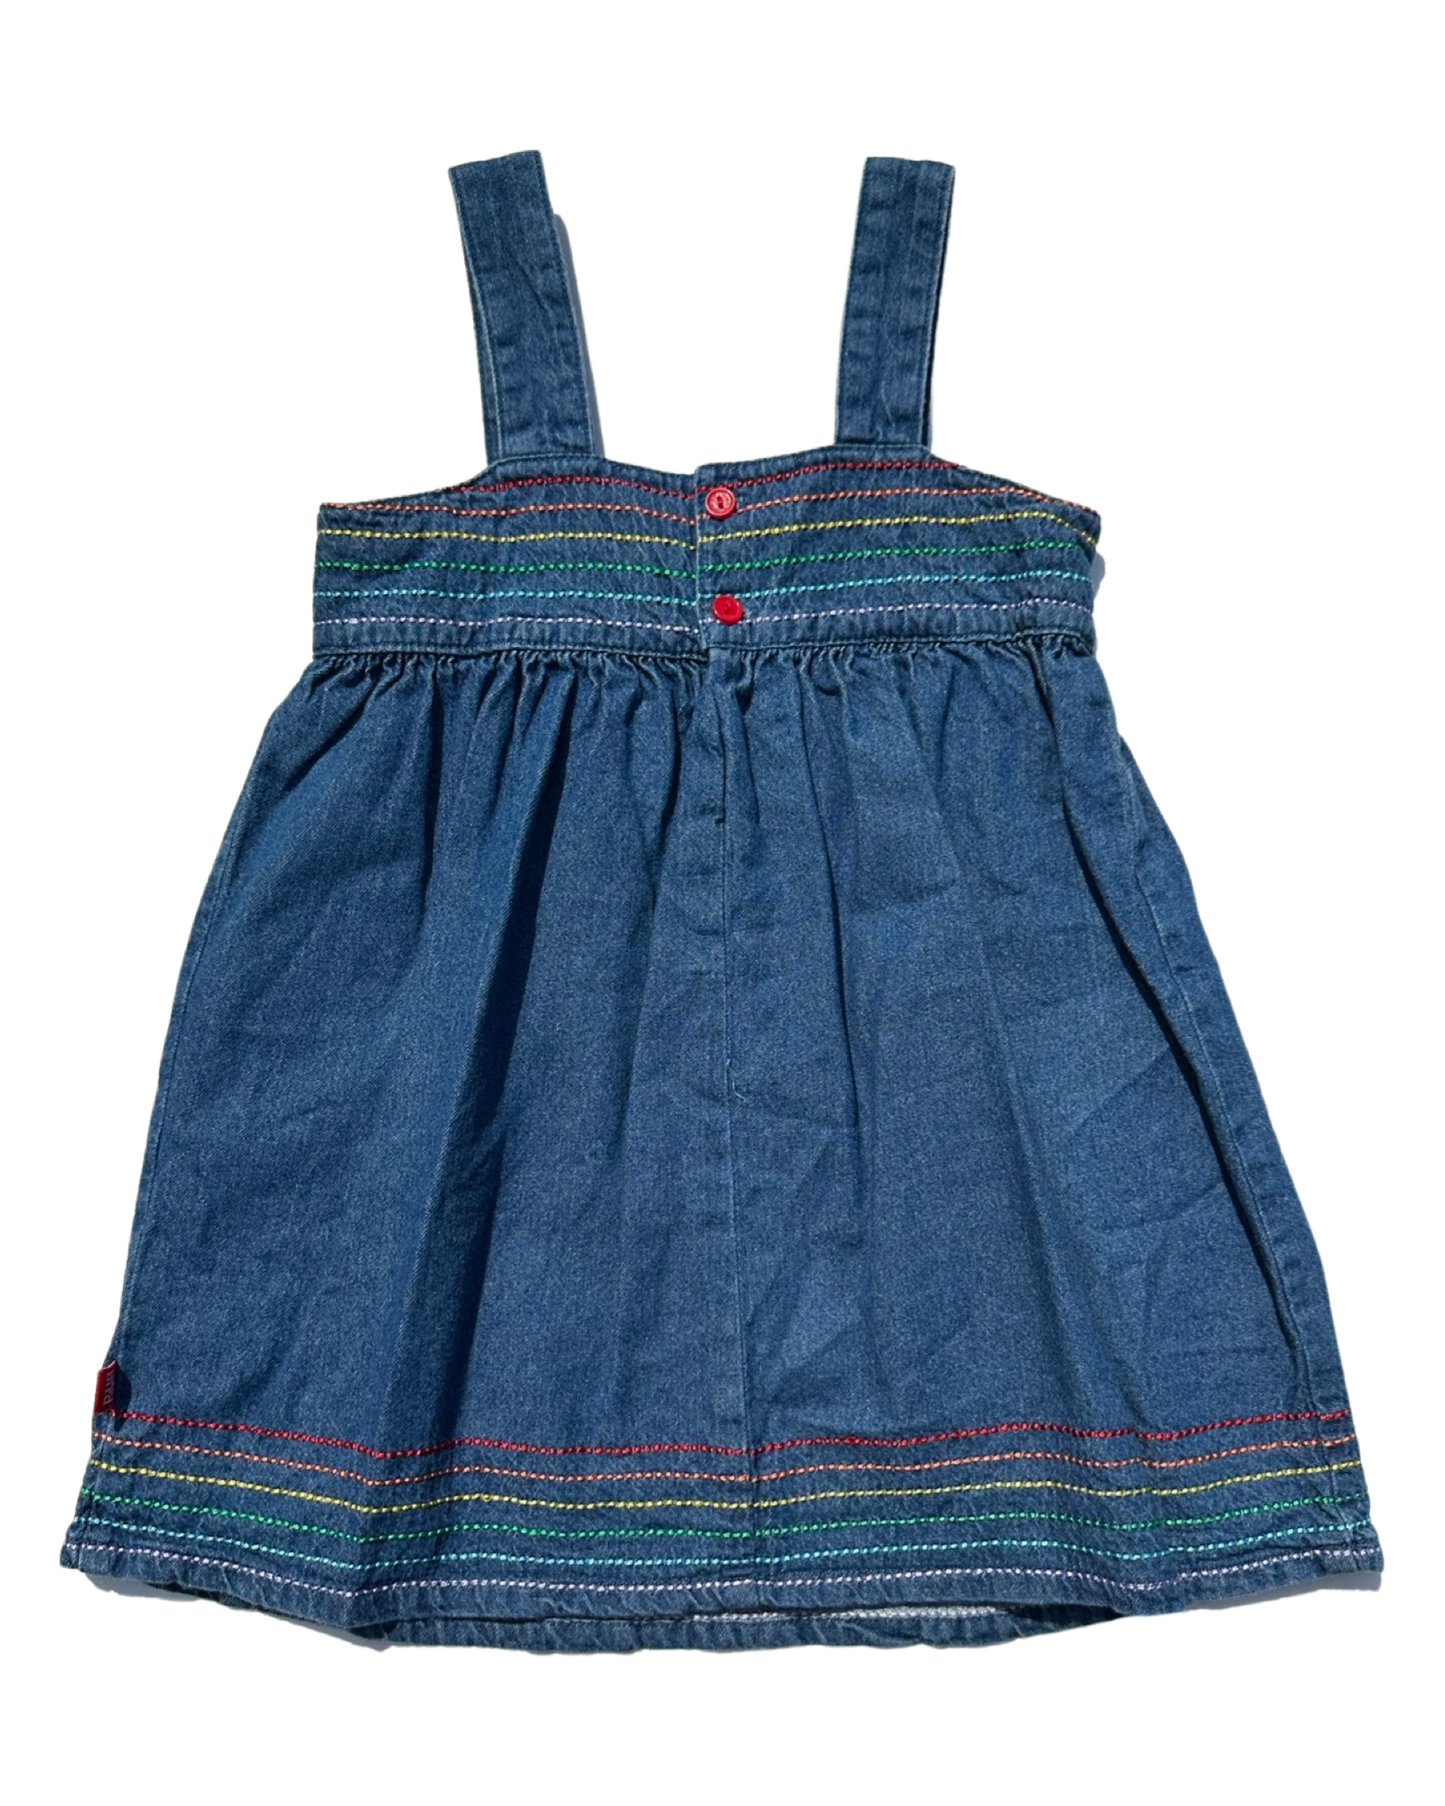 Little Bird by Jools denim dress with rainbow embroidery (size 18-24mths)